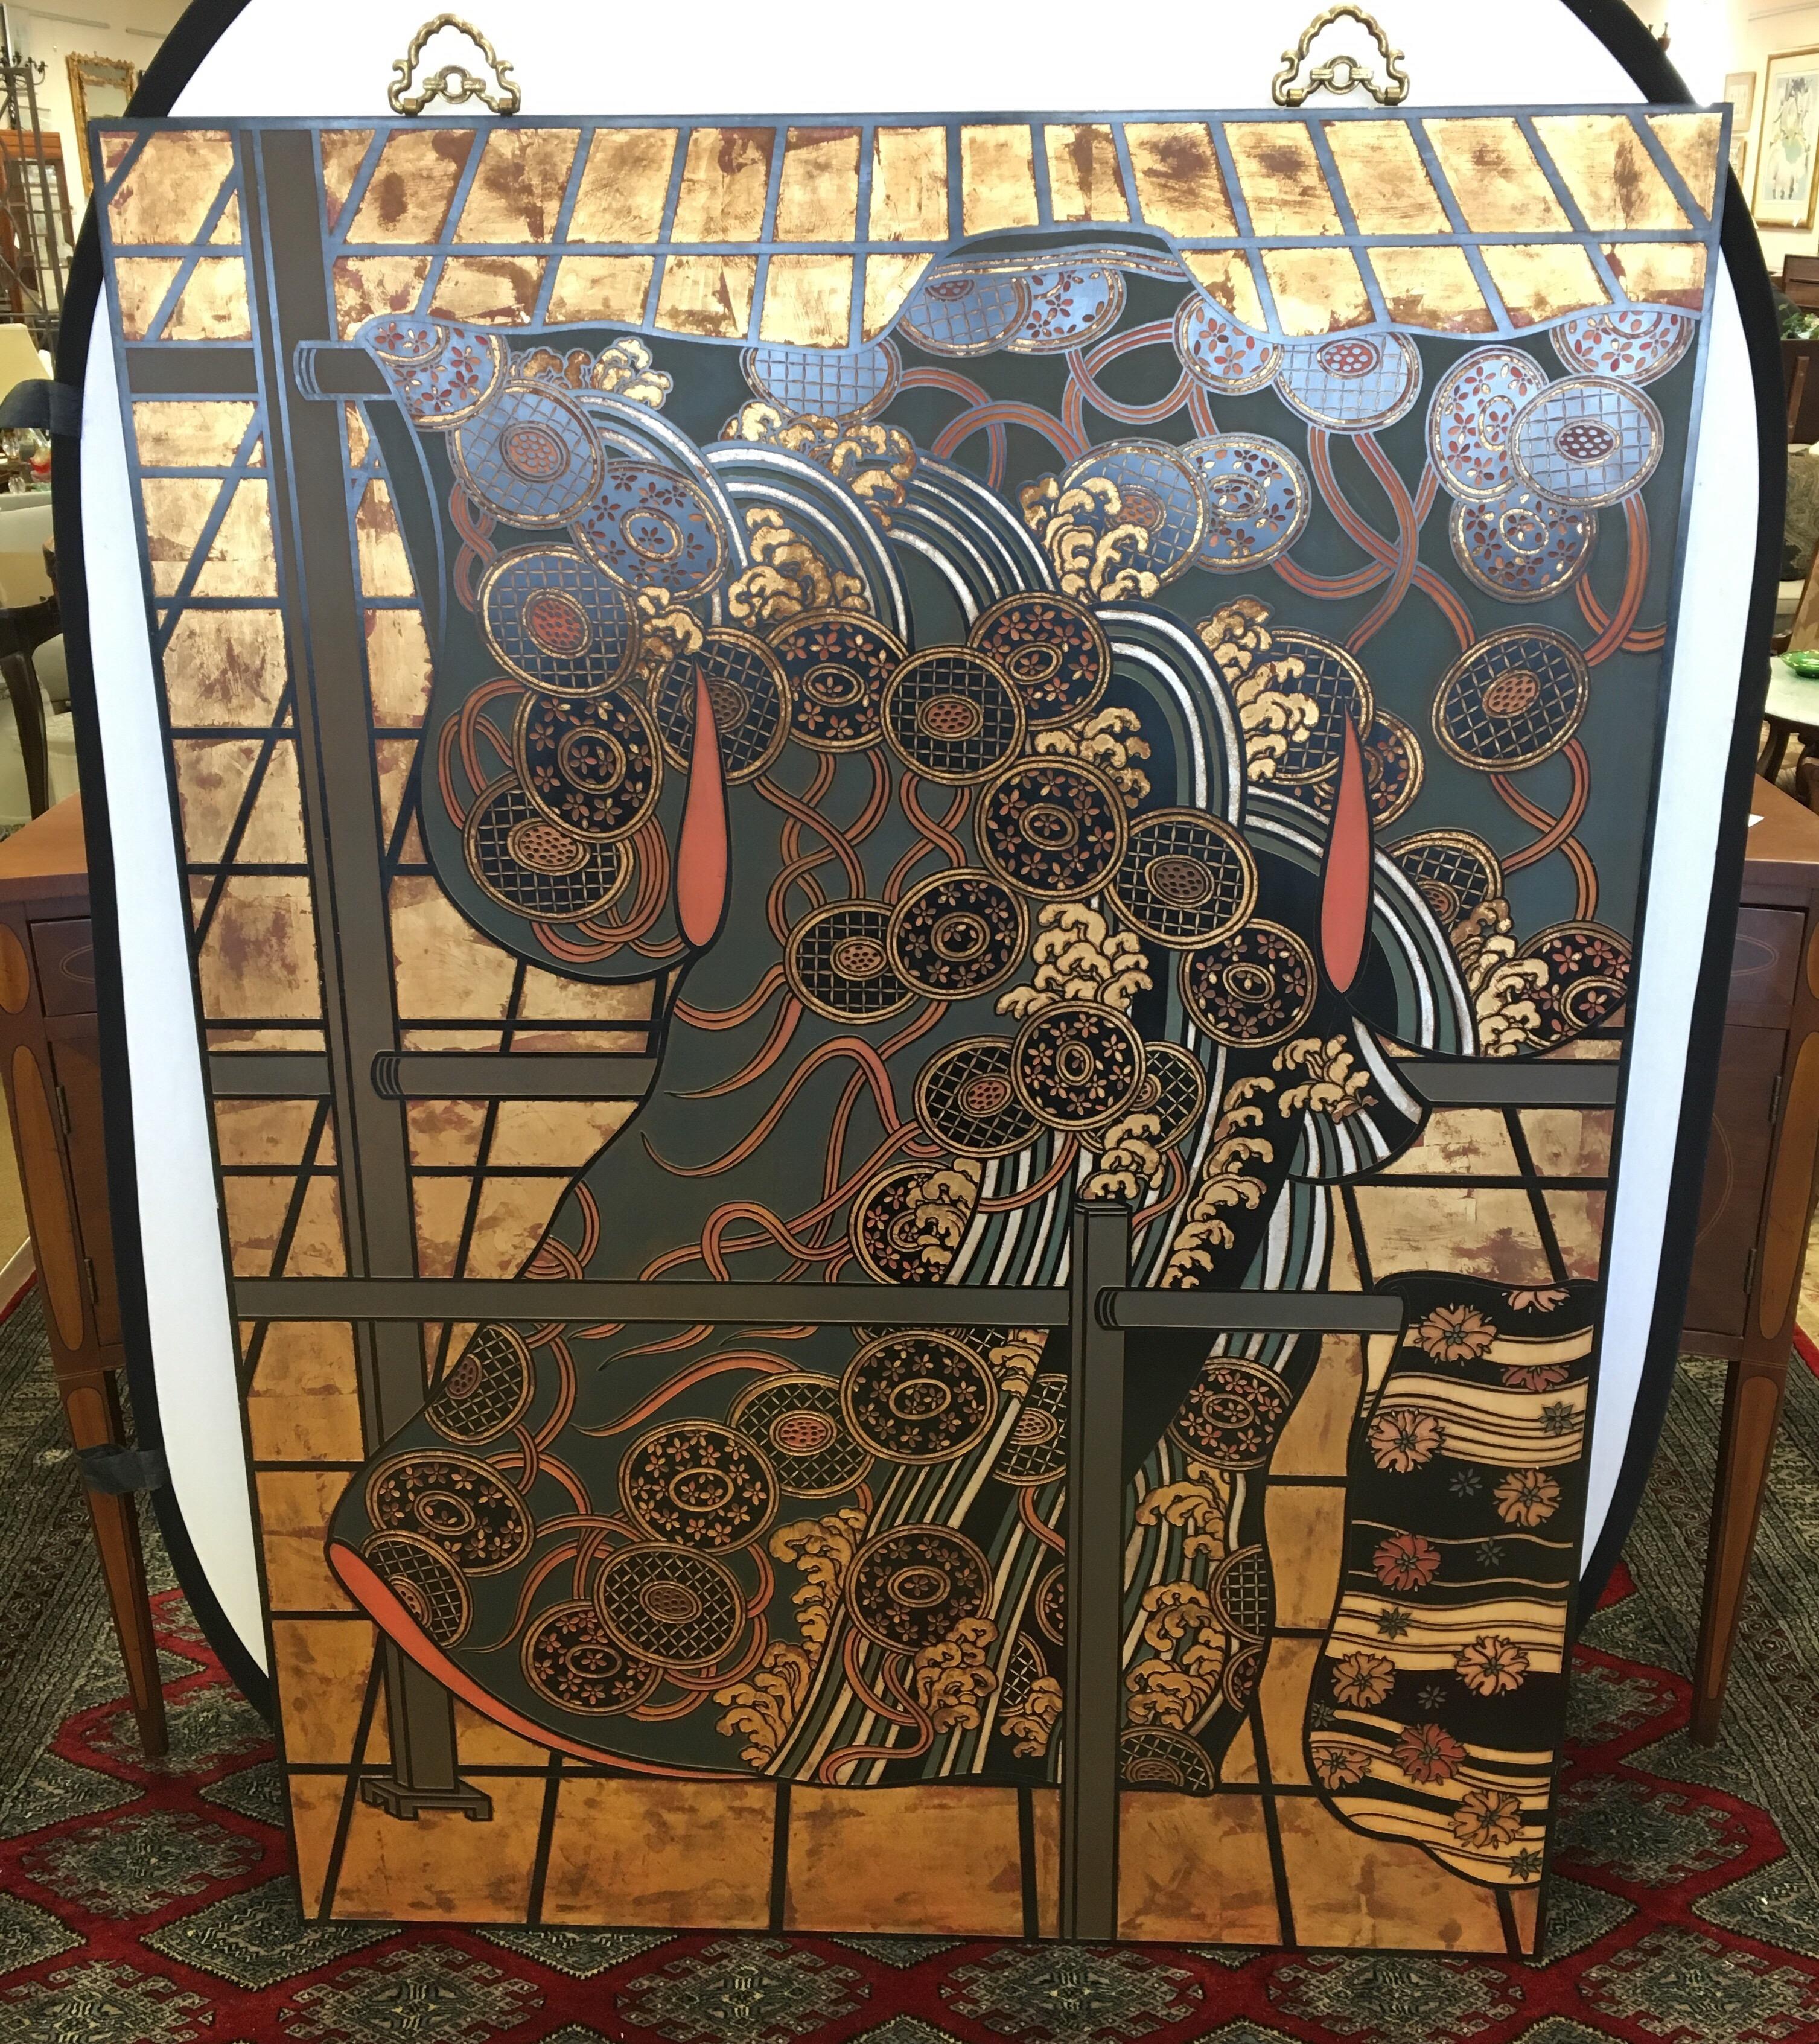 Rare, signed Maitland Smith wall hanging screen that is nothing short of magnificent. Manufactured in Hong Kong in the 1970's, this piece was purchased by one of the founders of the Parsons School of Design. The raised wooden pattern is painted in